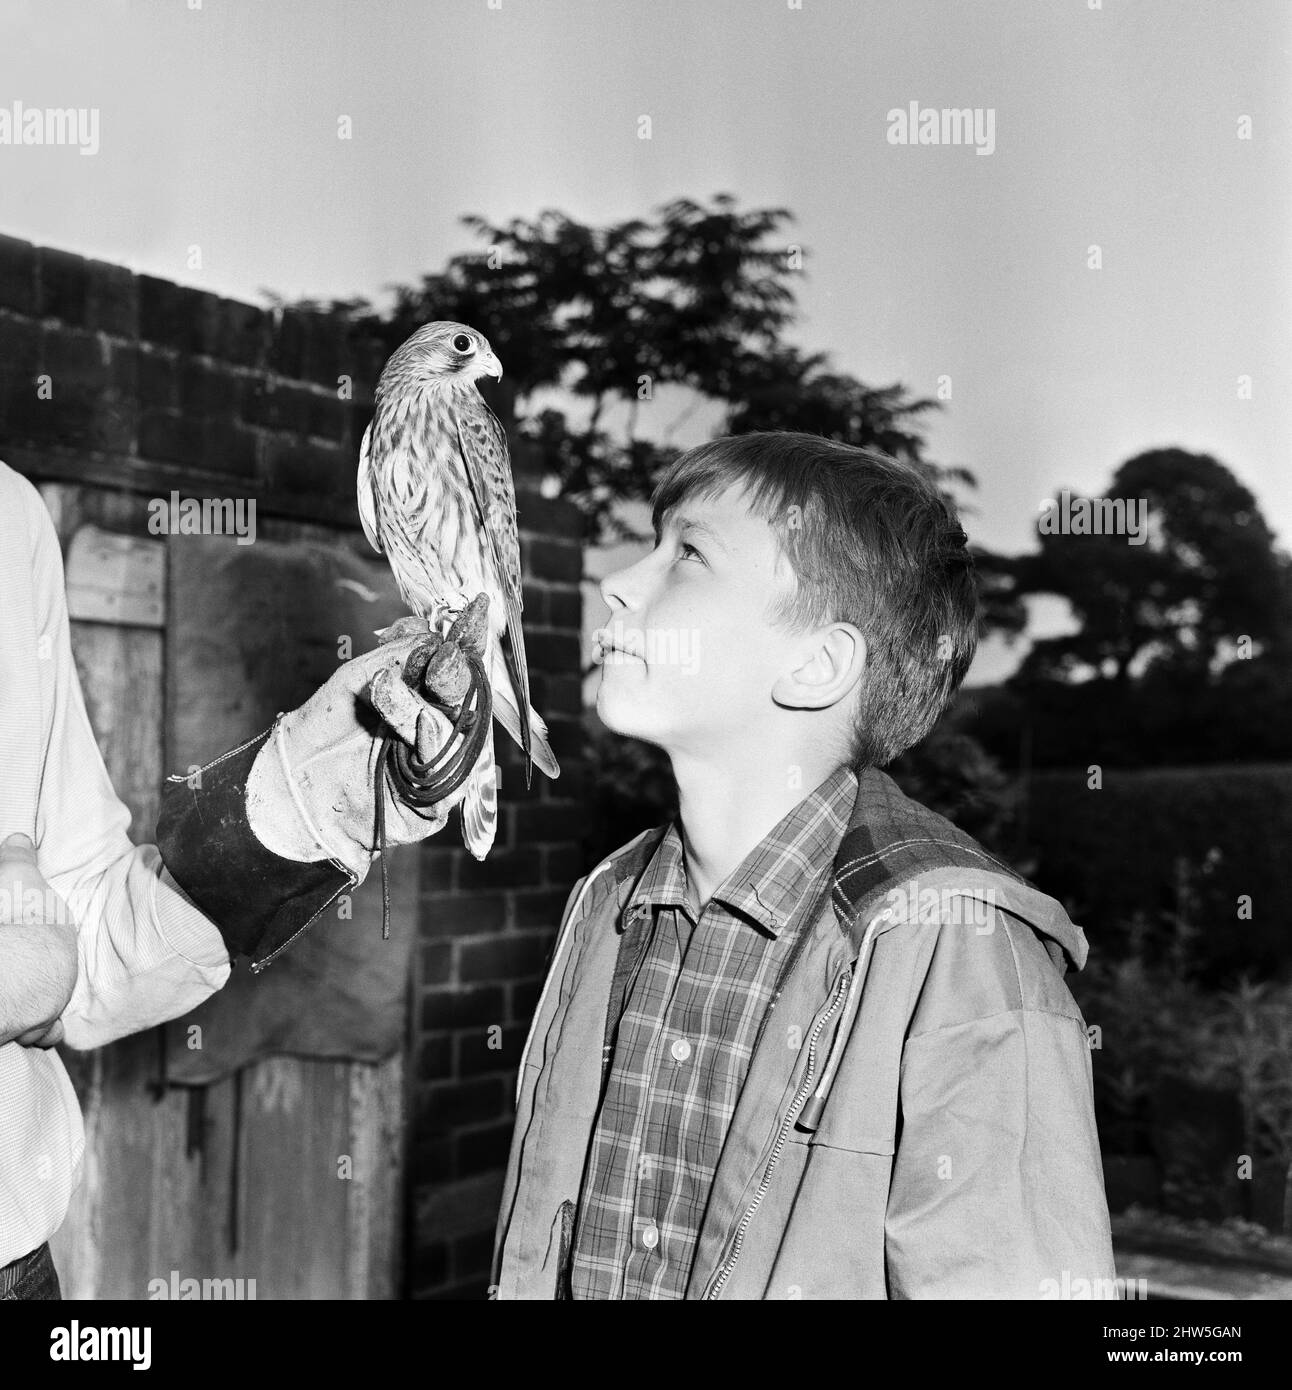 David Bradley, (aged 14) playing the part of Billy Casper, pictured with his Kestral, on the film set of the film Kes. Kes is a 1969 release drama film directed by Ken Loach and produced by Tony Garnett. The film is based on the 1968 novel A Kestrel for a Knave, written by the Barnsley-born author Barry Hines. The film is ranked seventh in the British Film Institute's Top Ten (British) Films and among the top ten in its list of the 50 films you should see by the age of 14.     The film was shot on location around Barnsley, Yorkshire, including St. Helens School, Athersley South, later renamed Stock Photo